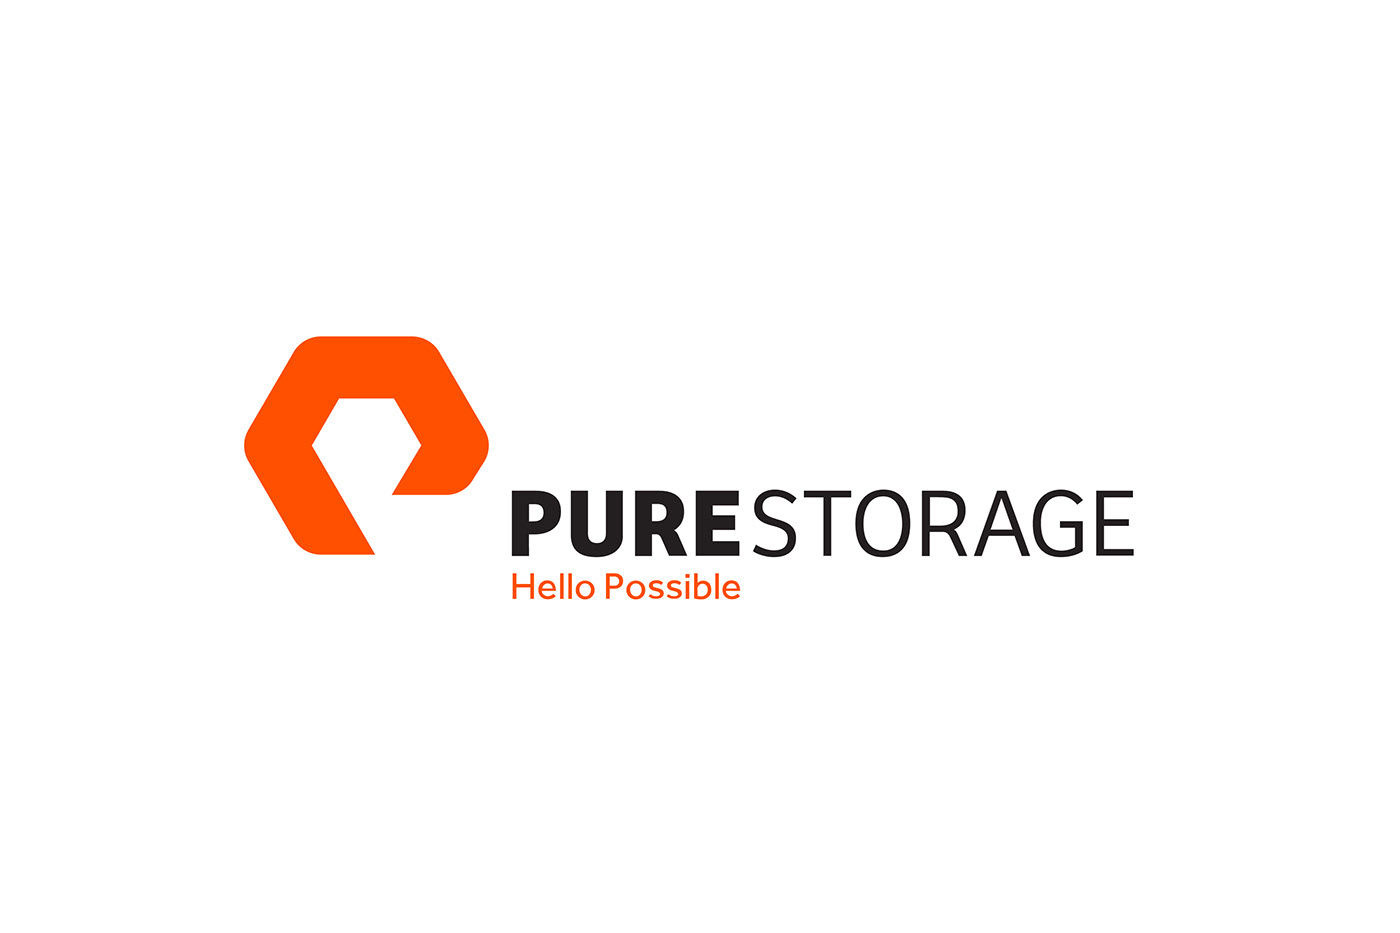 Moving Forward. Joining Pure Storage!